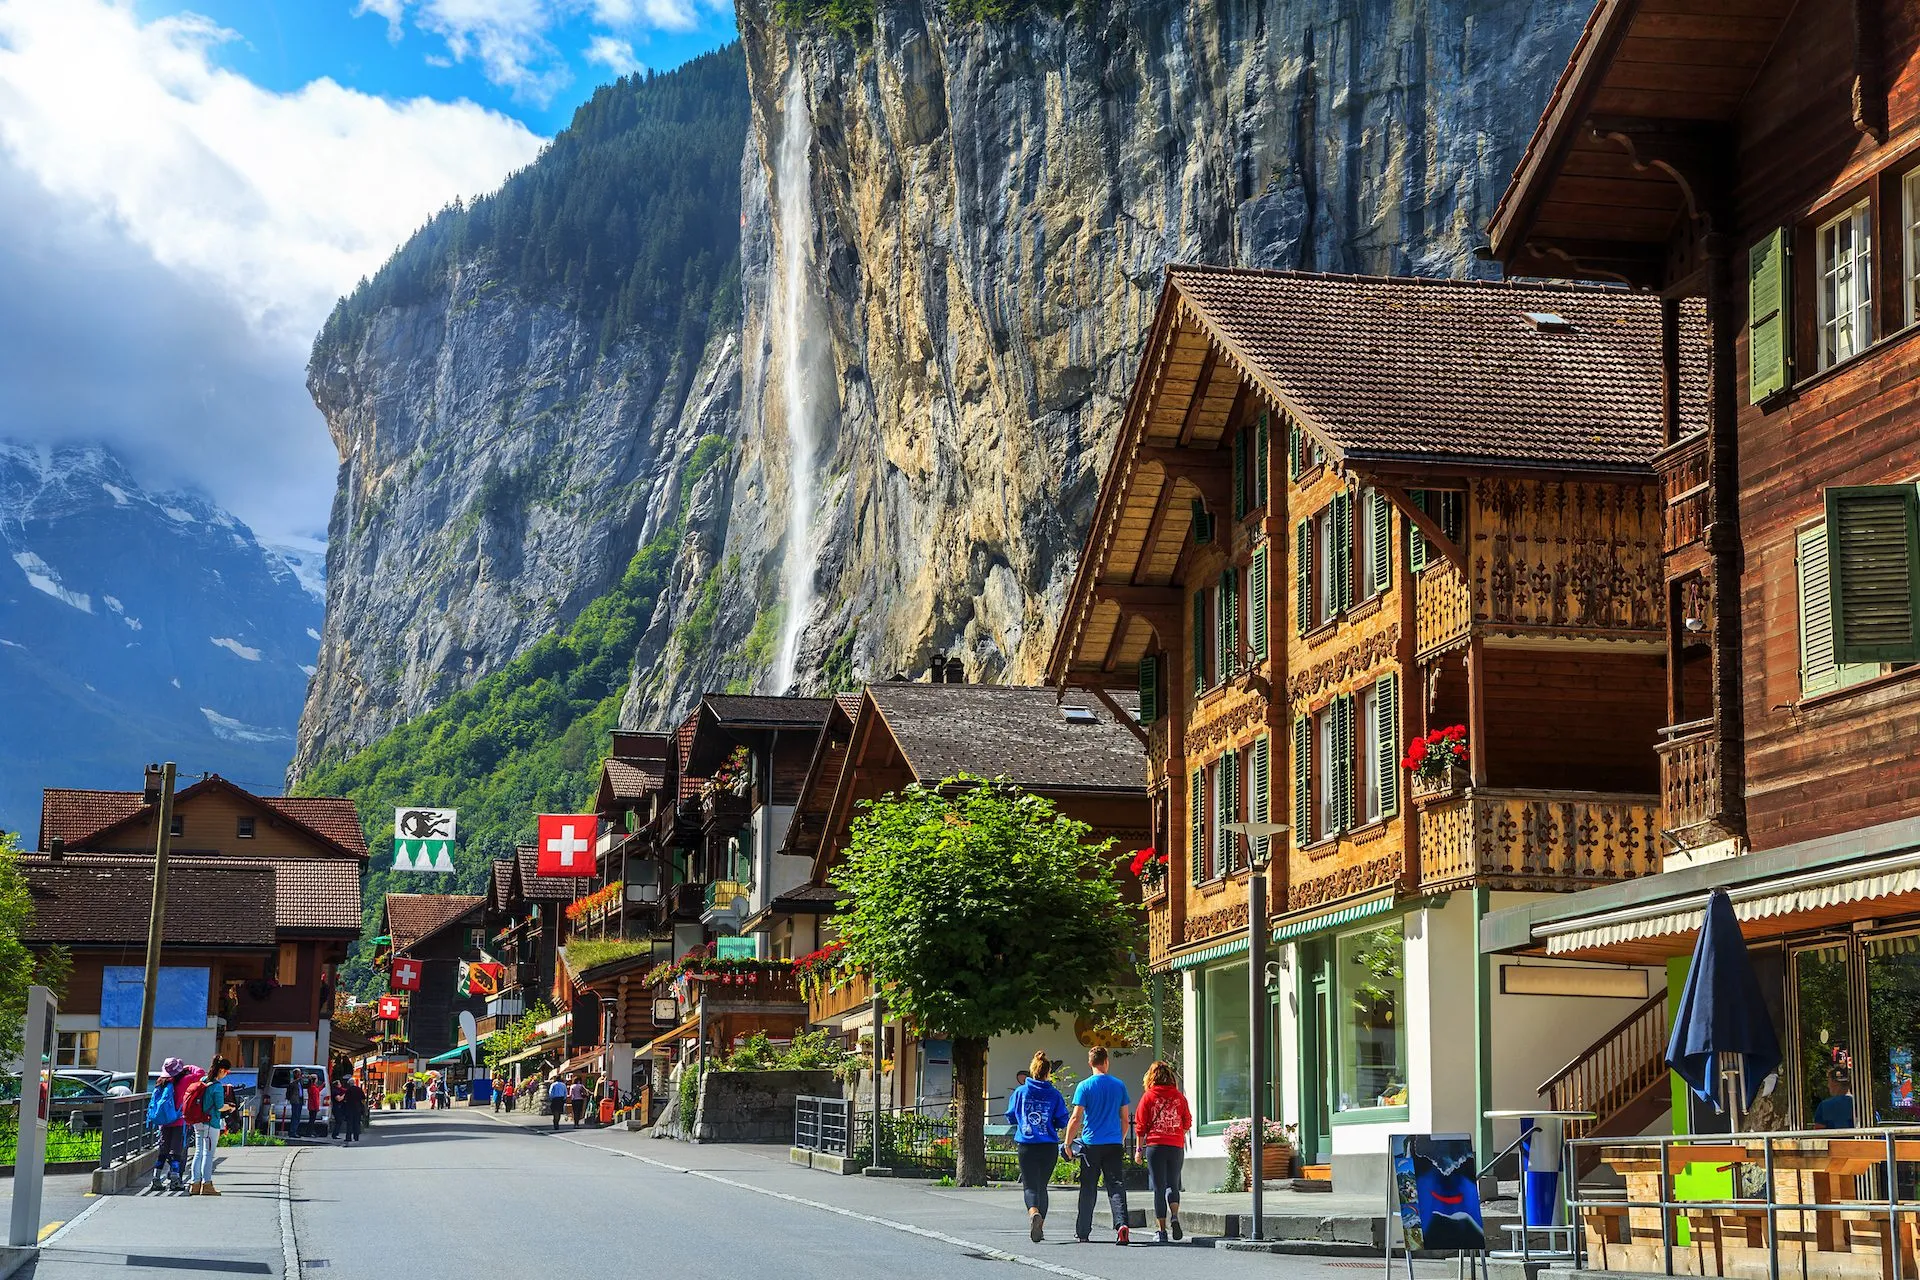 Spectacular principal street of lauterbrunnen and the stunning staubbach waterfall in background